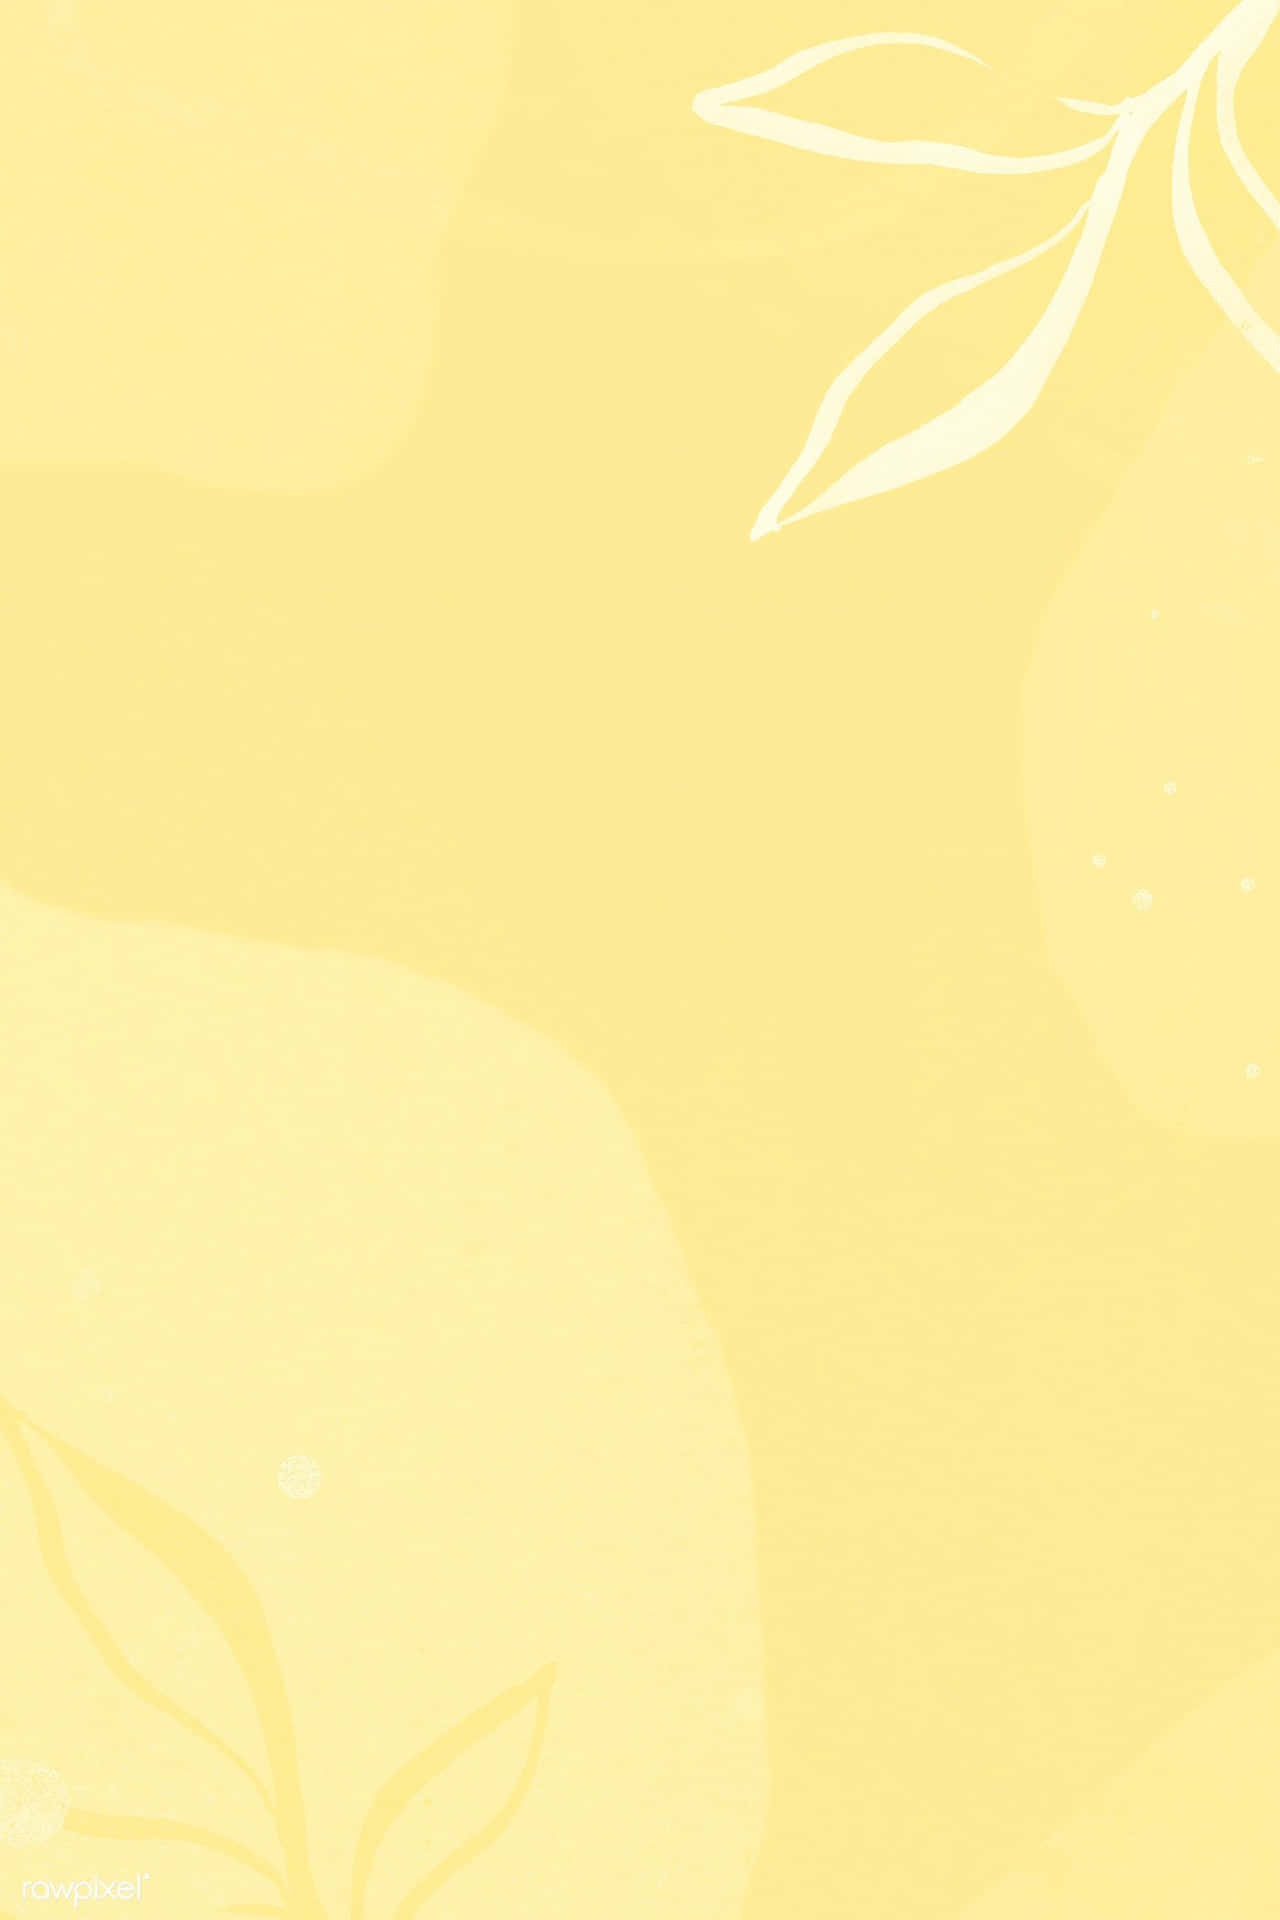 A Soothing Pastel Yellow Background That Lights Up The Screen With A Minimalist And Calming Tone.